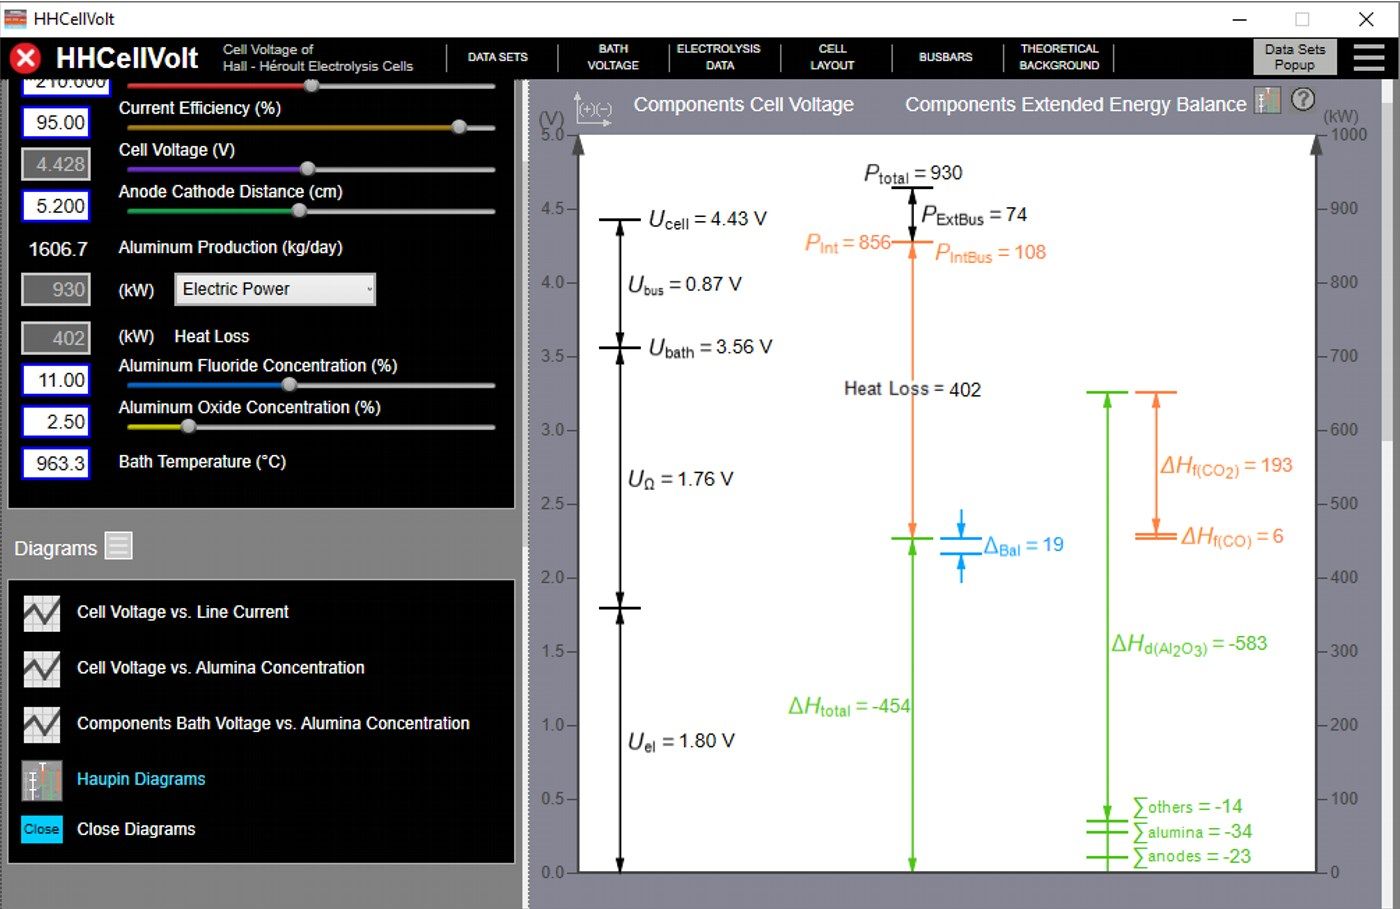 Haupin Diagrams: Components Cell Voltage, Extended Energy Balance